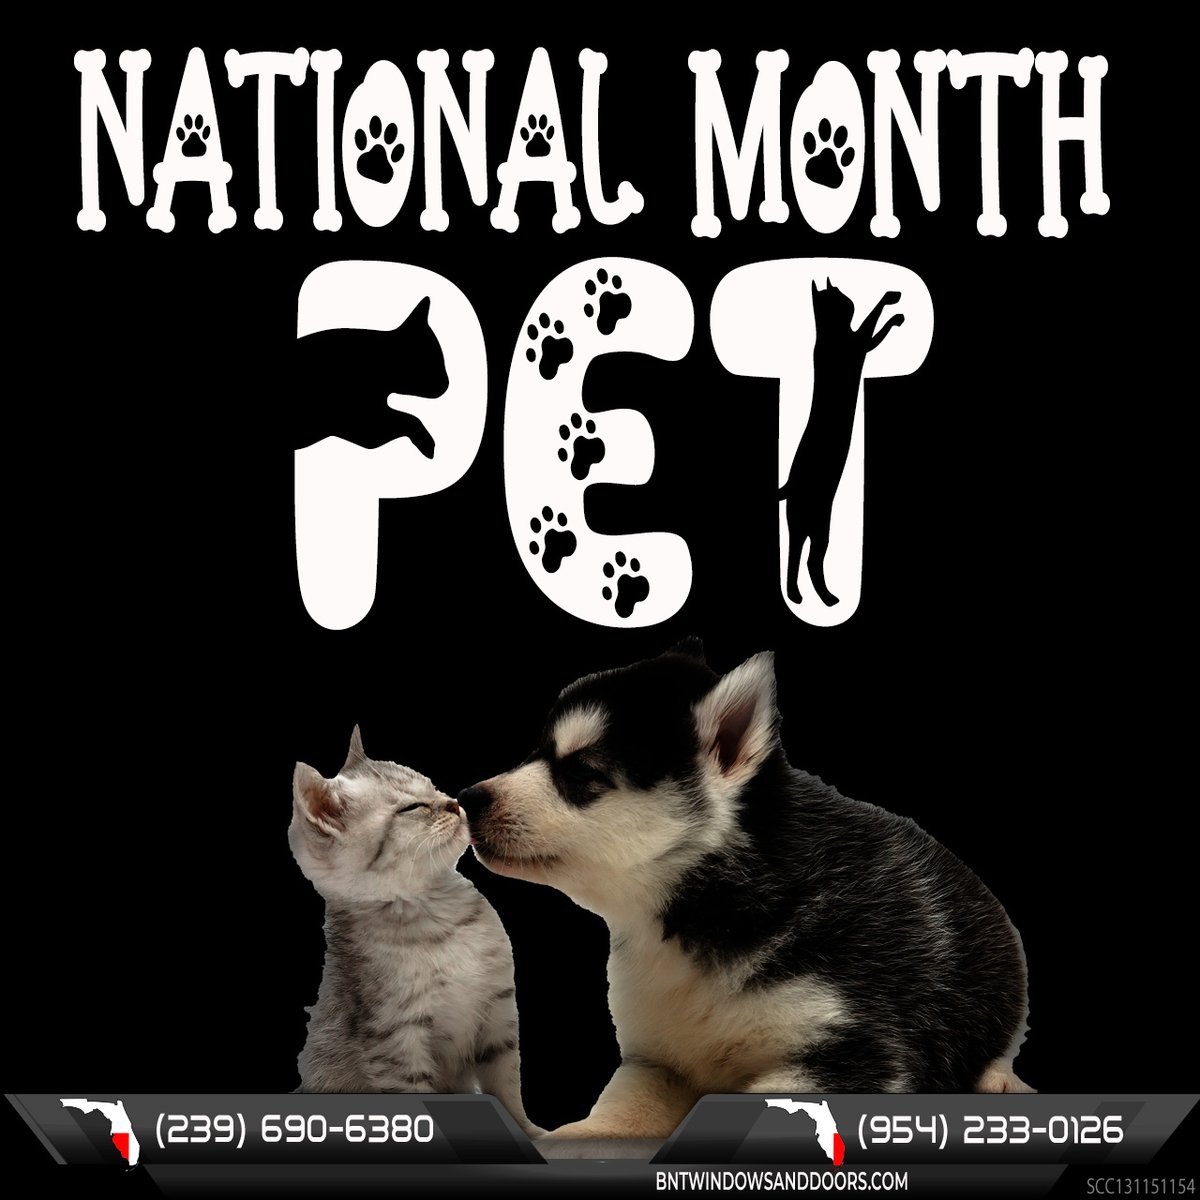 🐾 Happy National Pet Month! 🐶🐱 Here at BNT, we understand that your fur babies are family. That's why we offer top-notch protection for your precious pets. Let us take care of the rest! 💕 #NationalPetMonth #FurBabyProtection #BNTPets